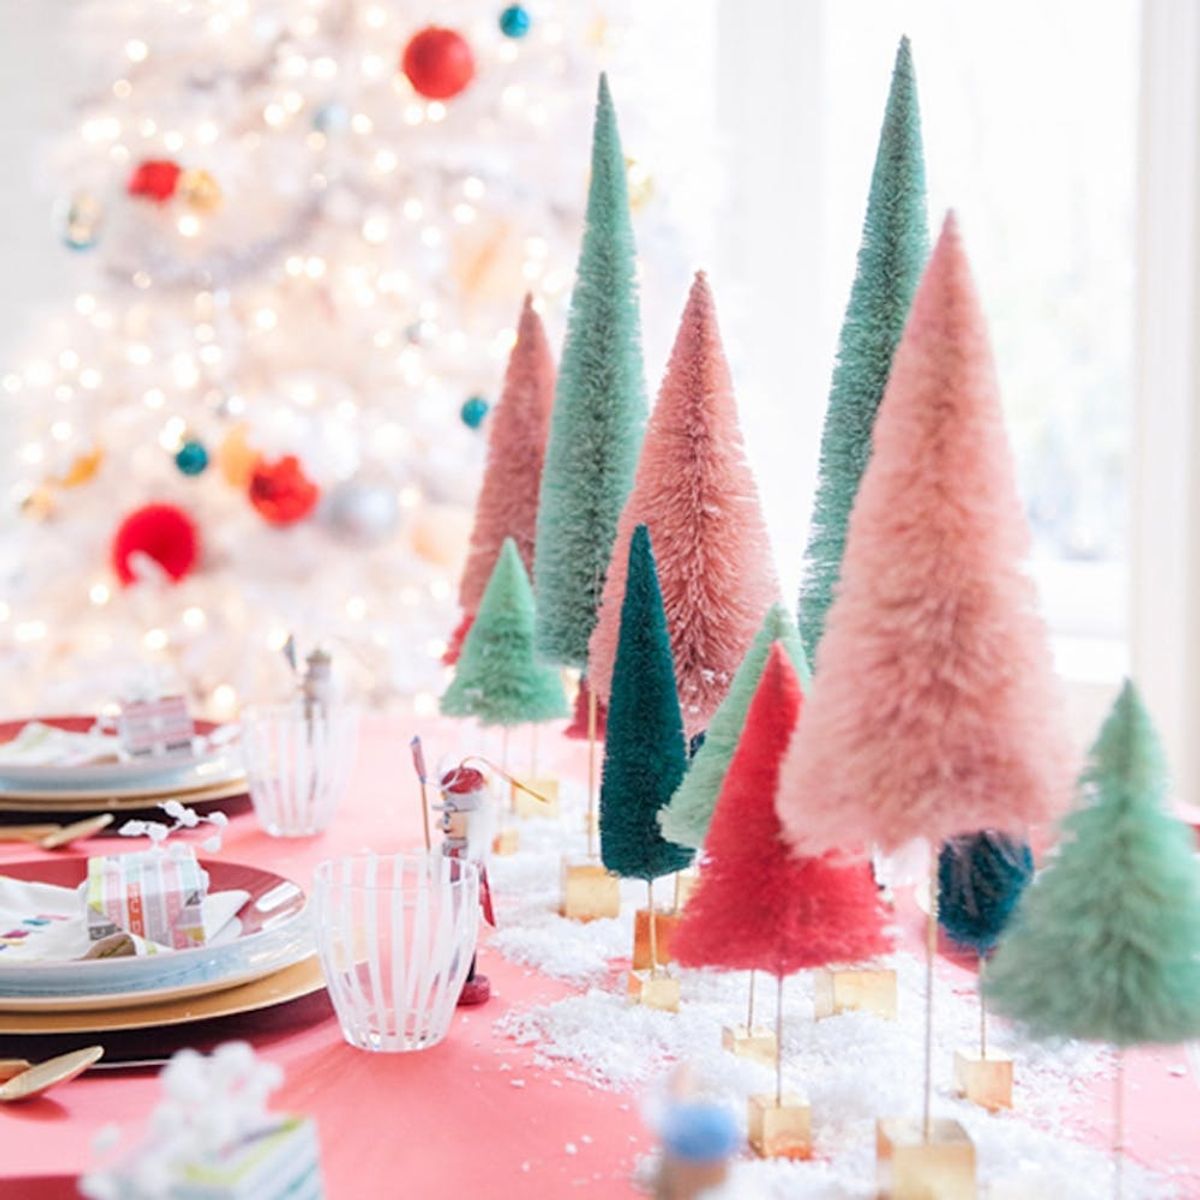 50 Christmas Decoration Ideas That Will Give You Holiday #GOALS